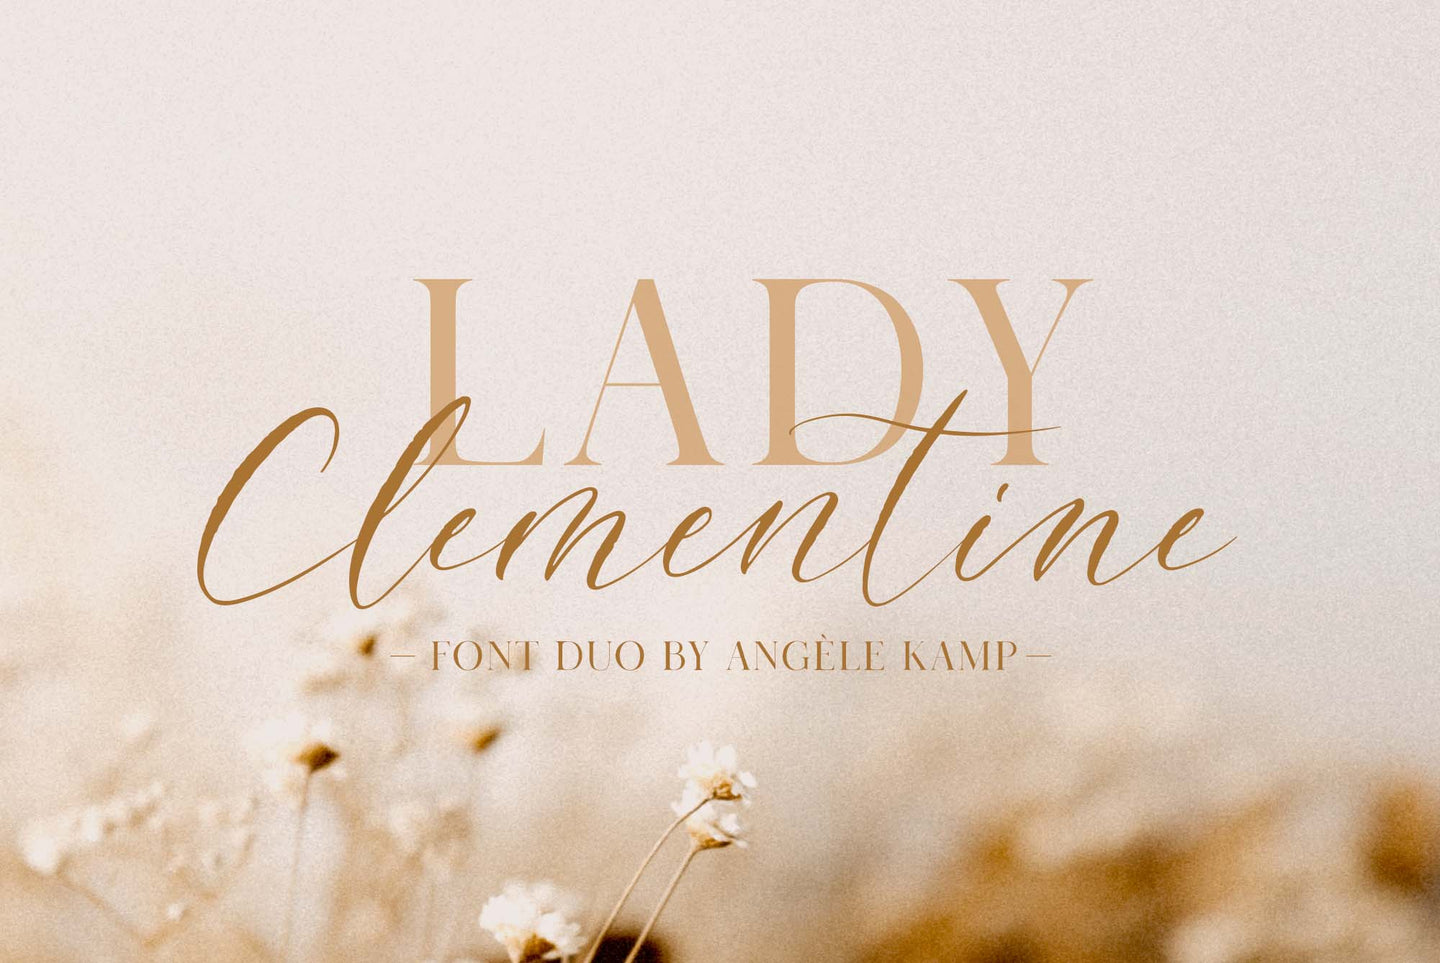 Lady Clementine font duo